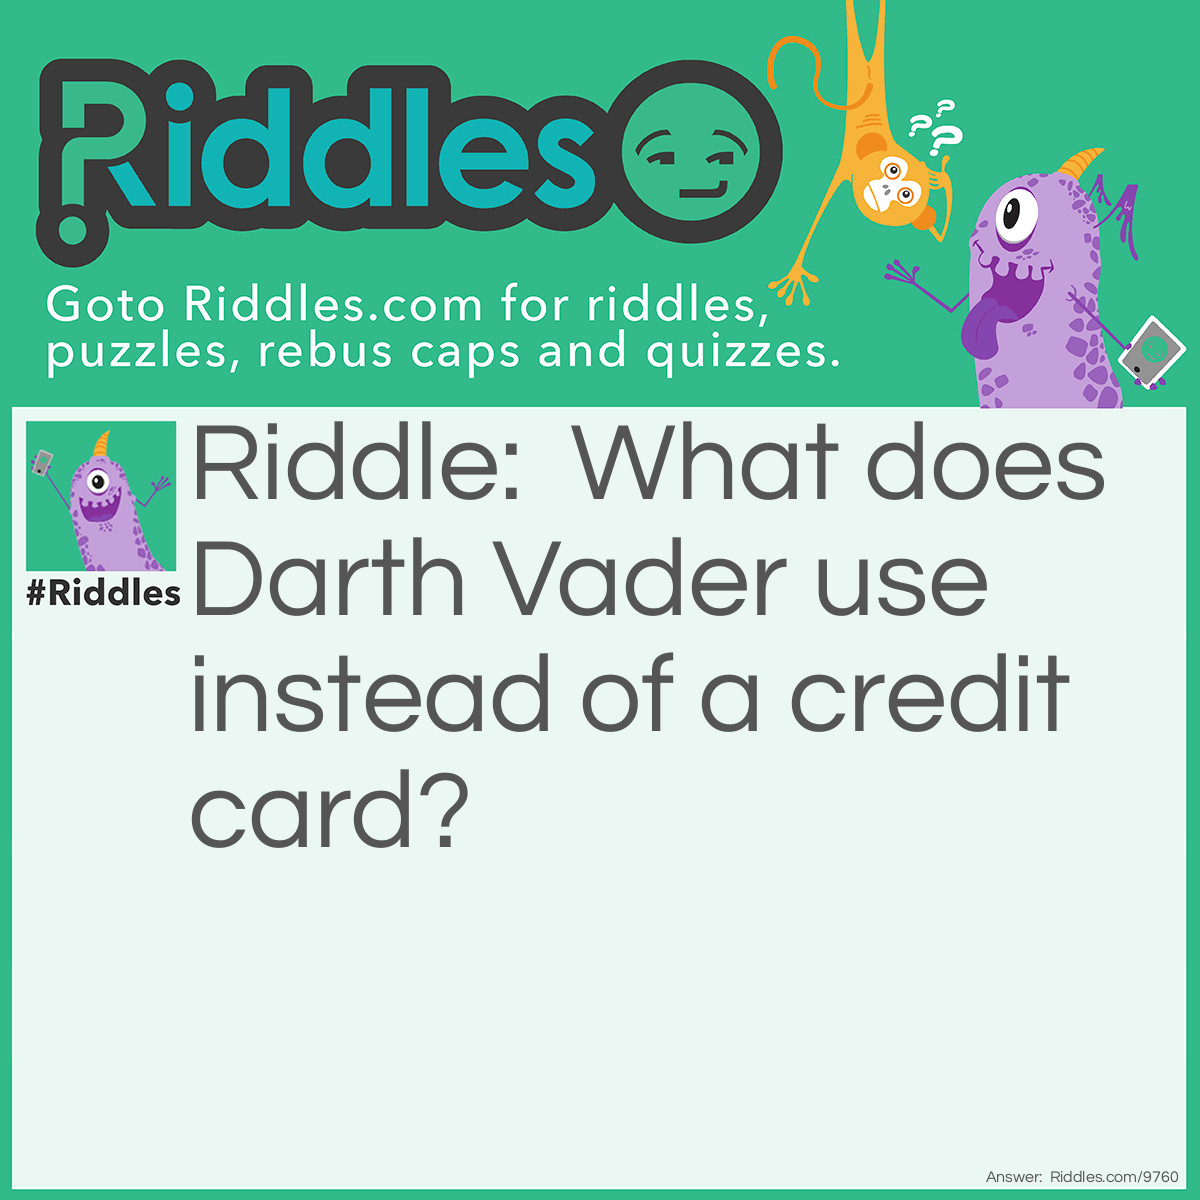 Riddle: What does Darth Vader use instead of a credit card? Answer: PayPalpatine.